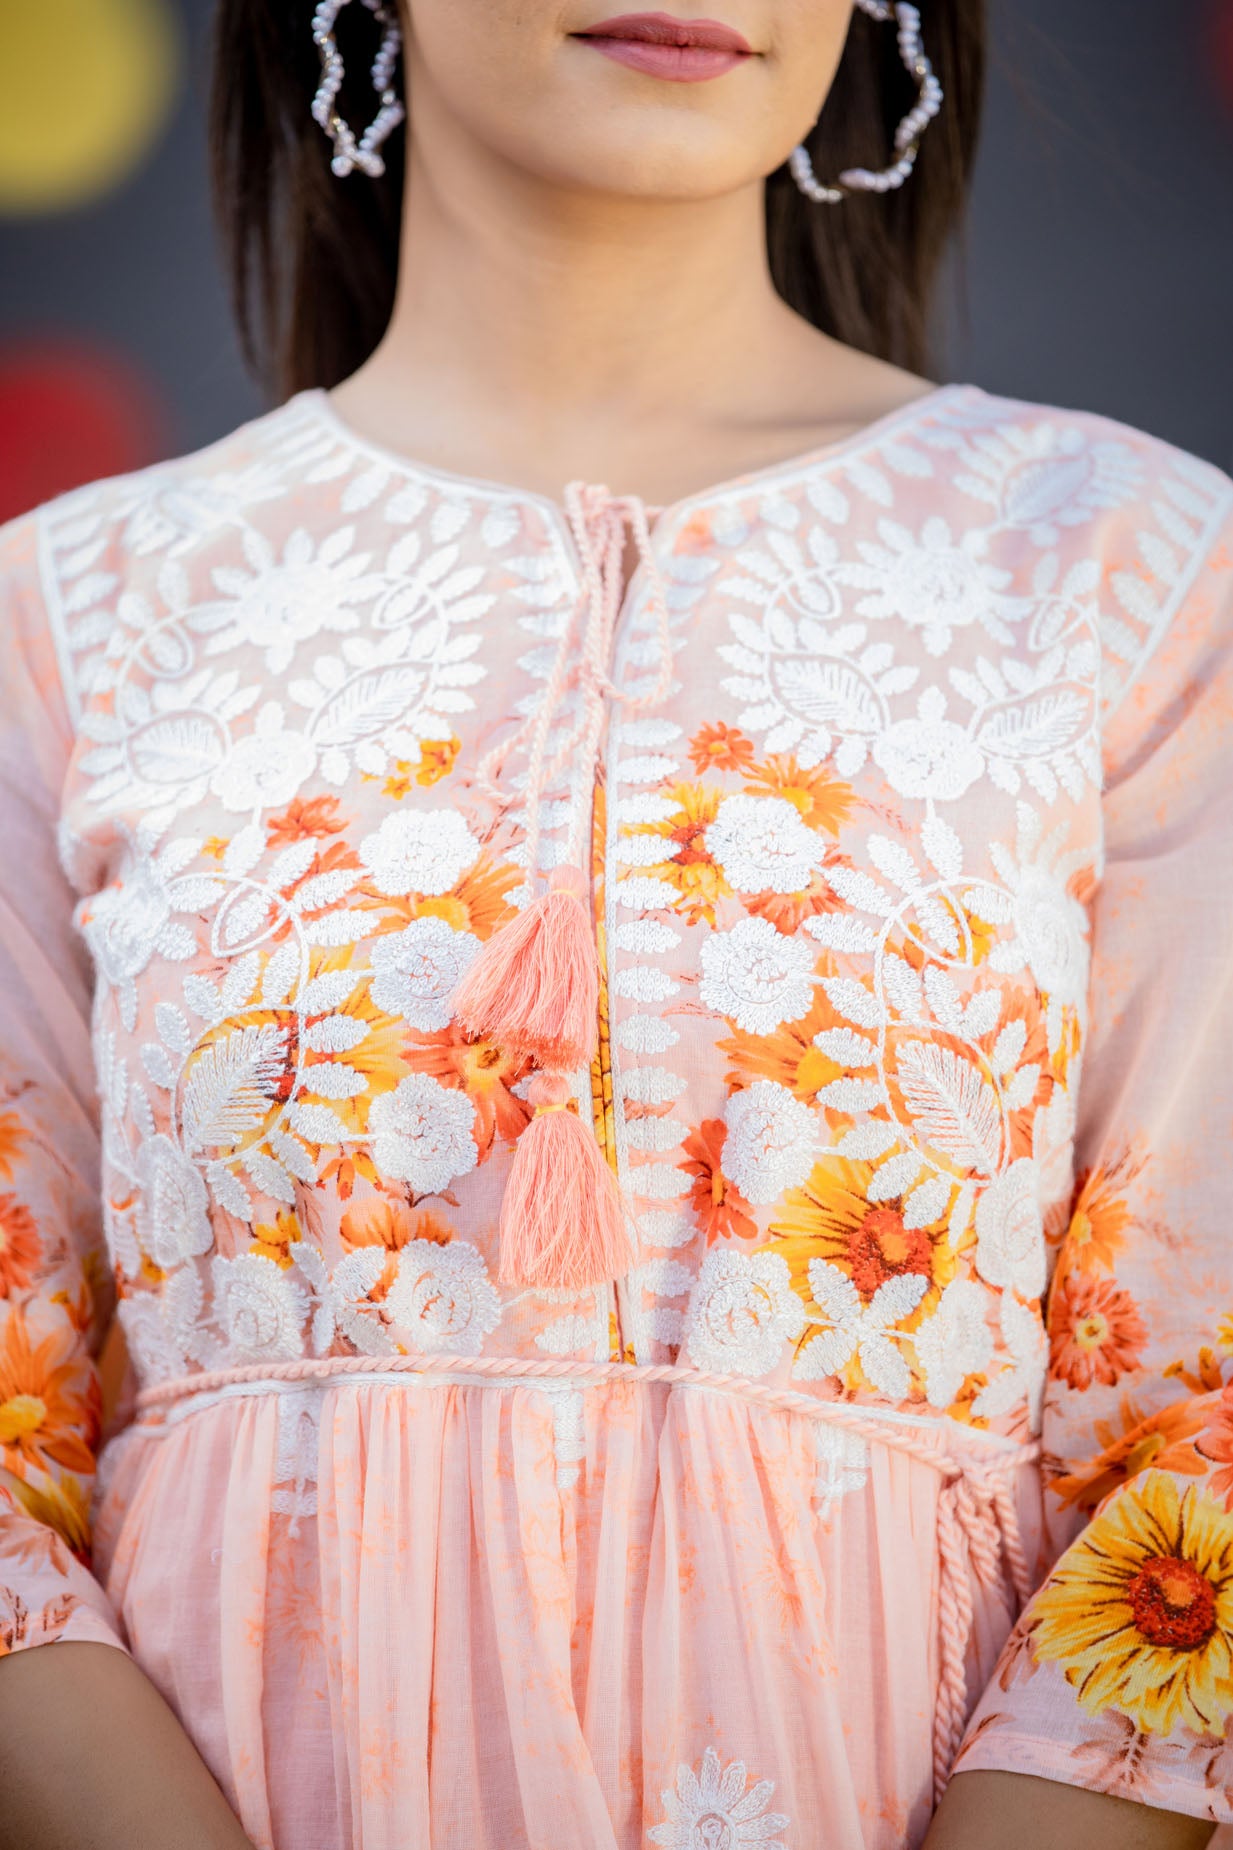 The Flowery Prints